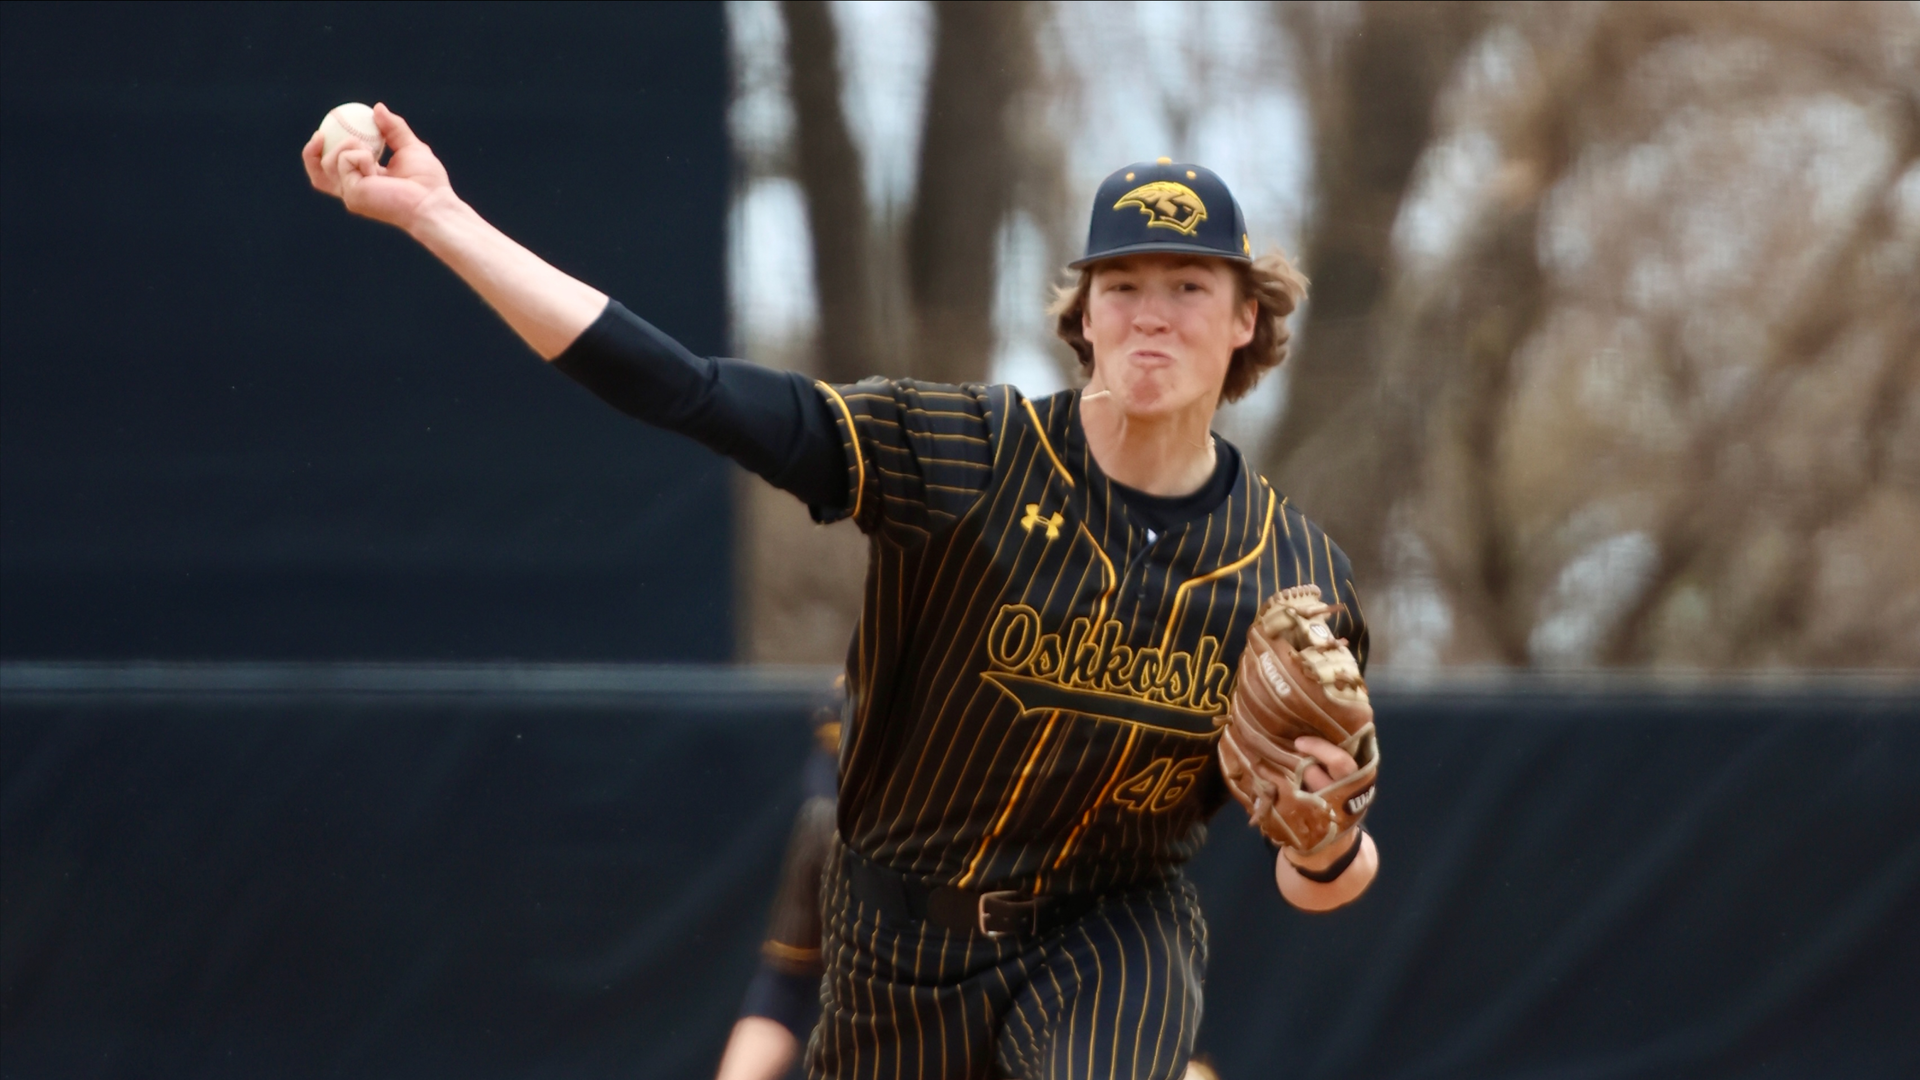 LJ Waco threw 8.0 innings with a career high 14 strikeouts in the Titans' 8-3 win over UW-Stevens Point on Thursday. Photo Credit: Evan Berger, UW-Oshkosh Sports Information